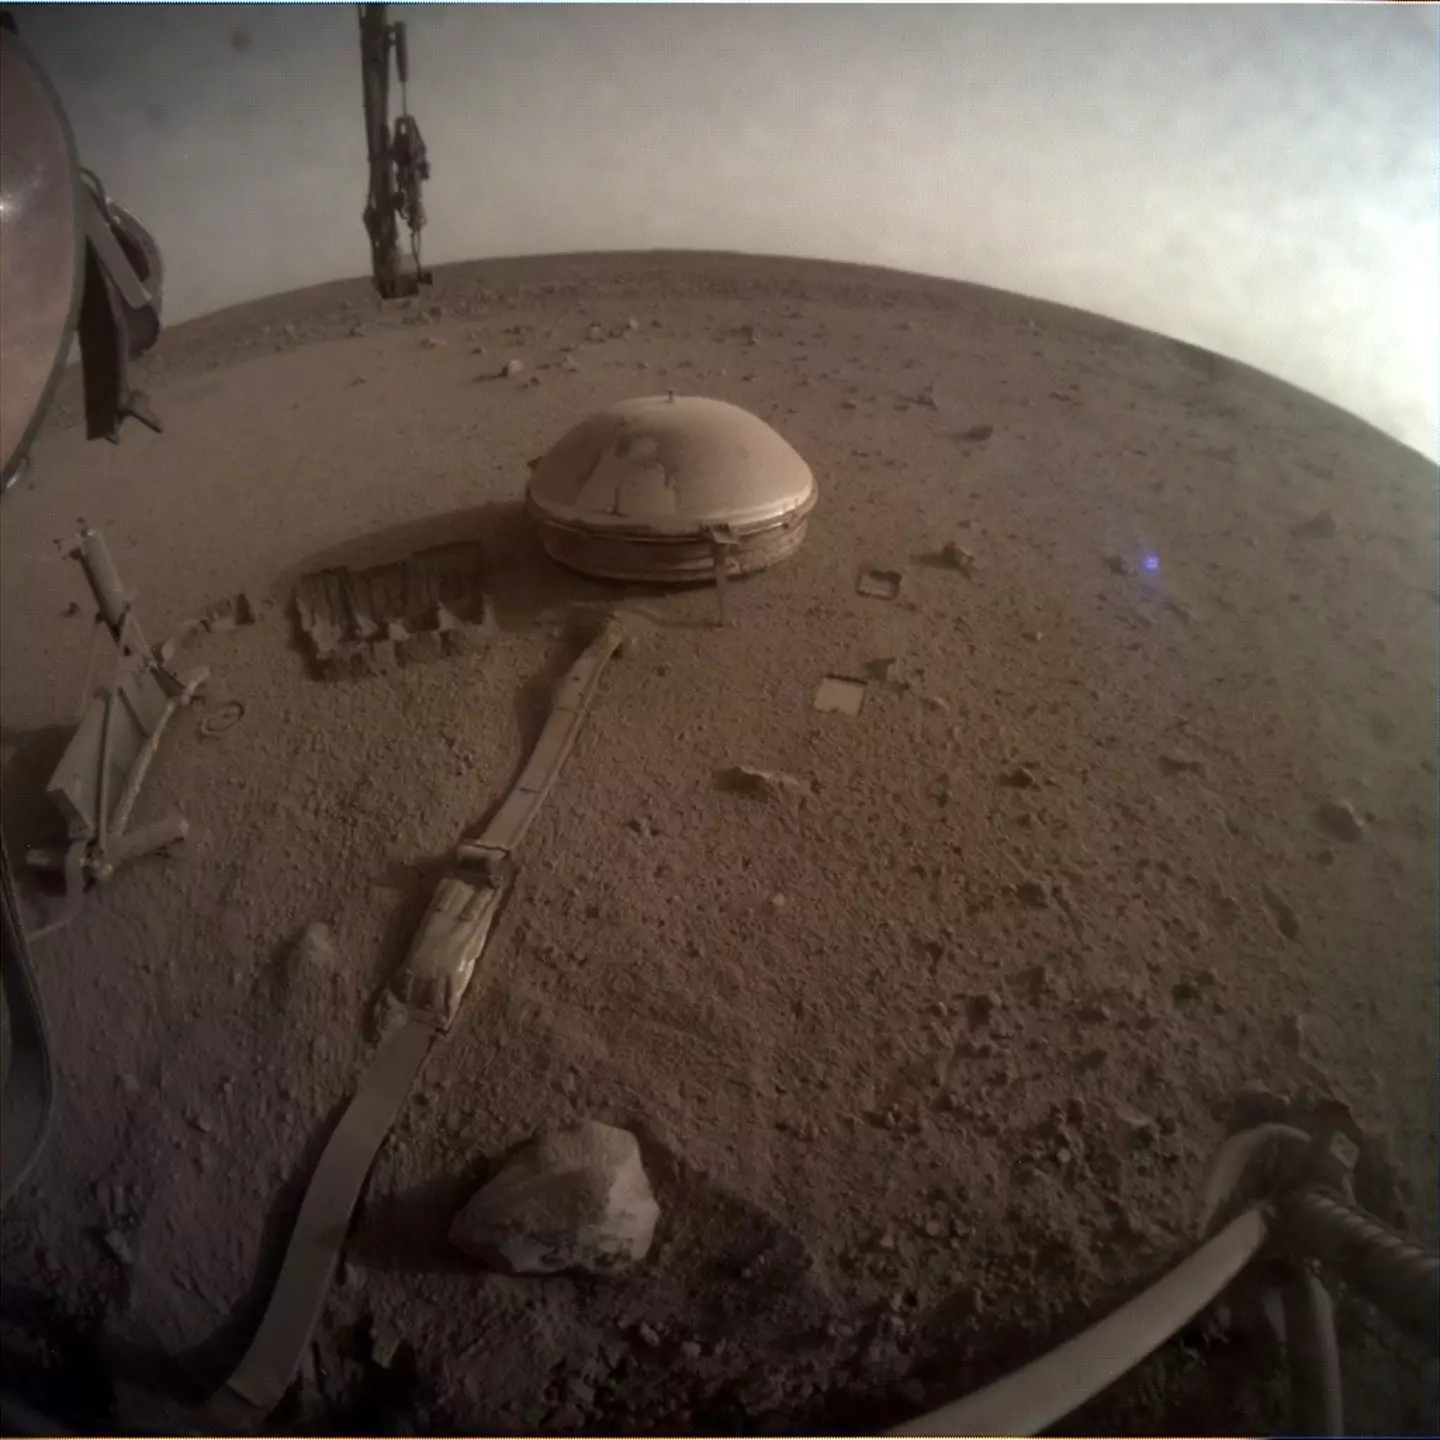 Here's the final image received from NASA's InSight.